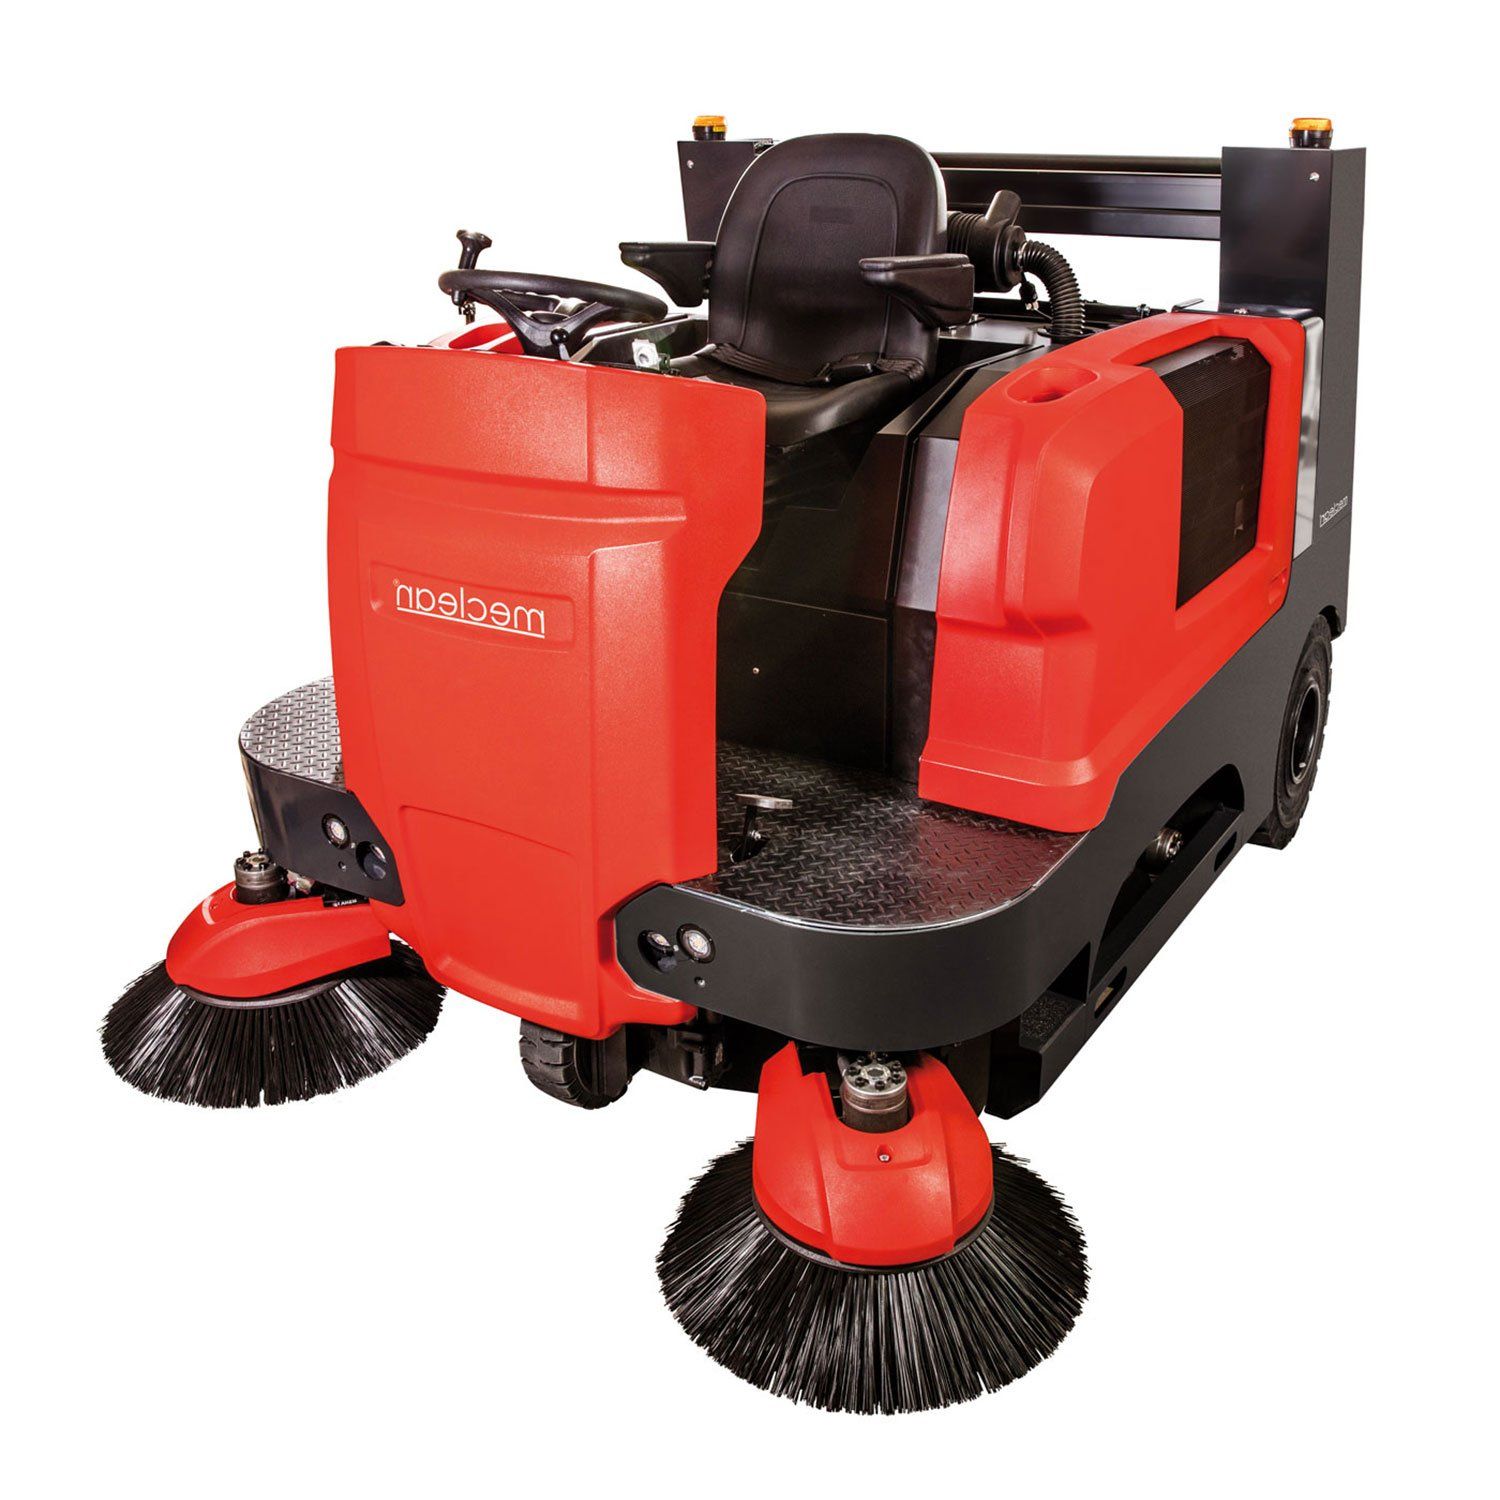 Meclean professional industrial ride-on sweeper diesel powered drive BUSTER 1800TD